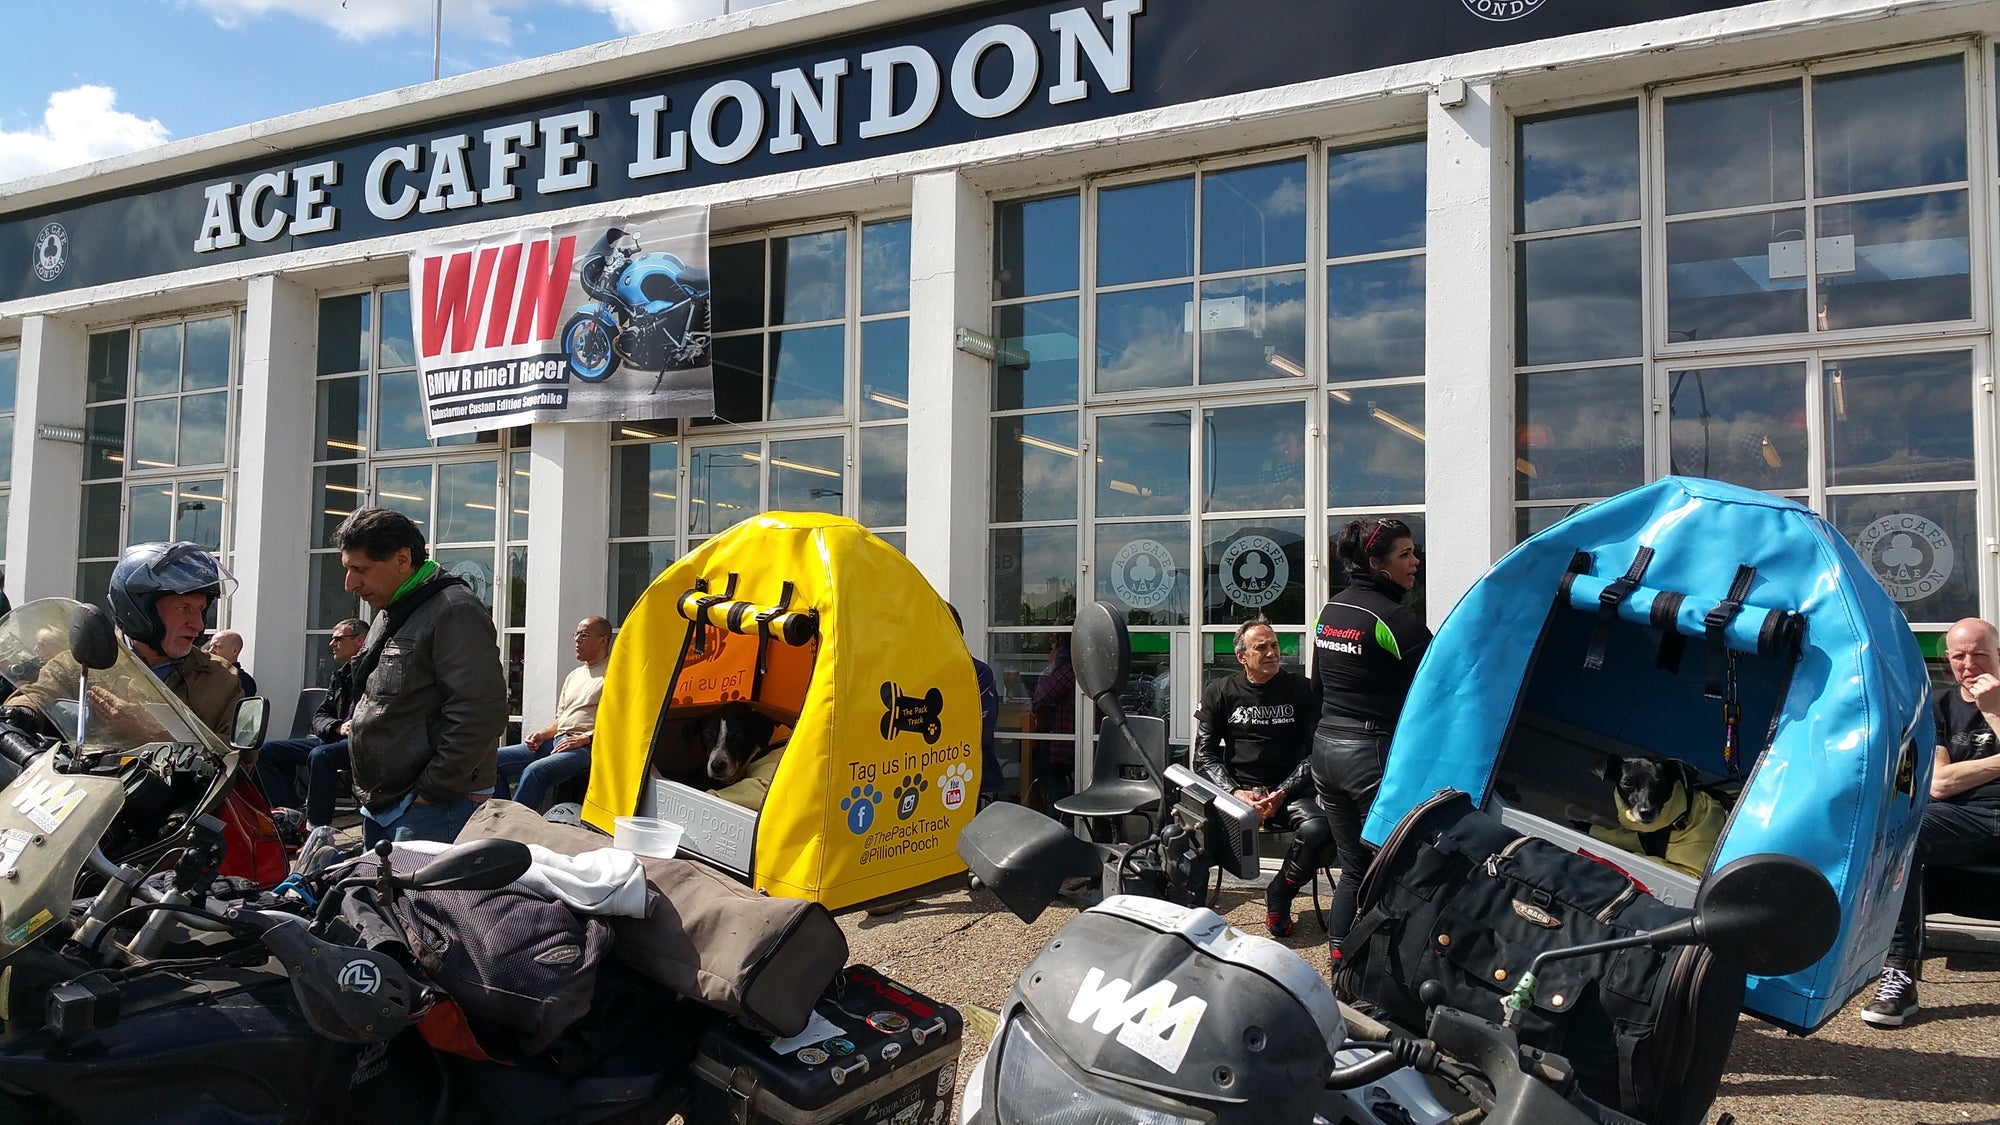 The Pack Track at the Ace Cafe London meeting other bikers and enjoying the sunshine. Weeti and Shadow were happy sitting in their Pillion Pooch getting lots of photos.